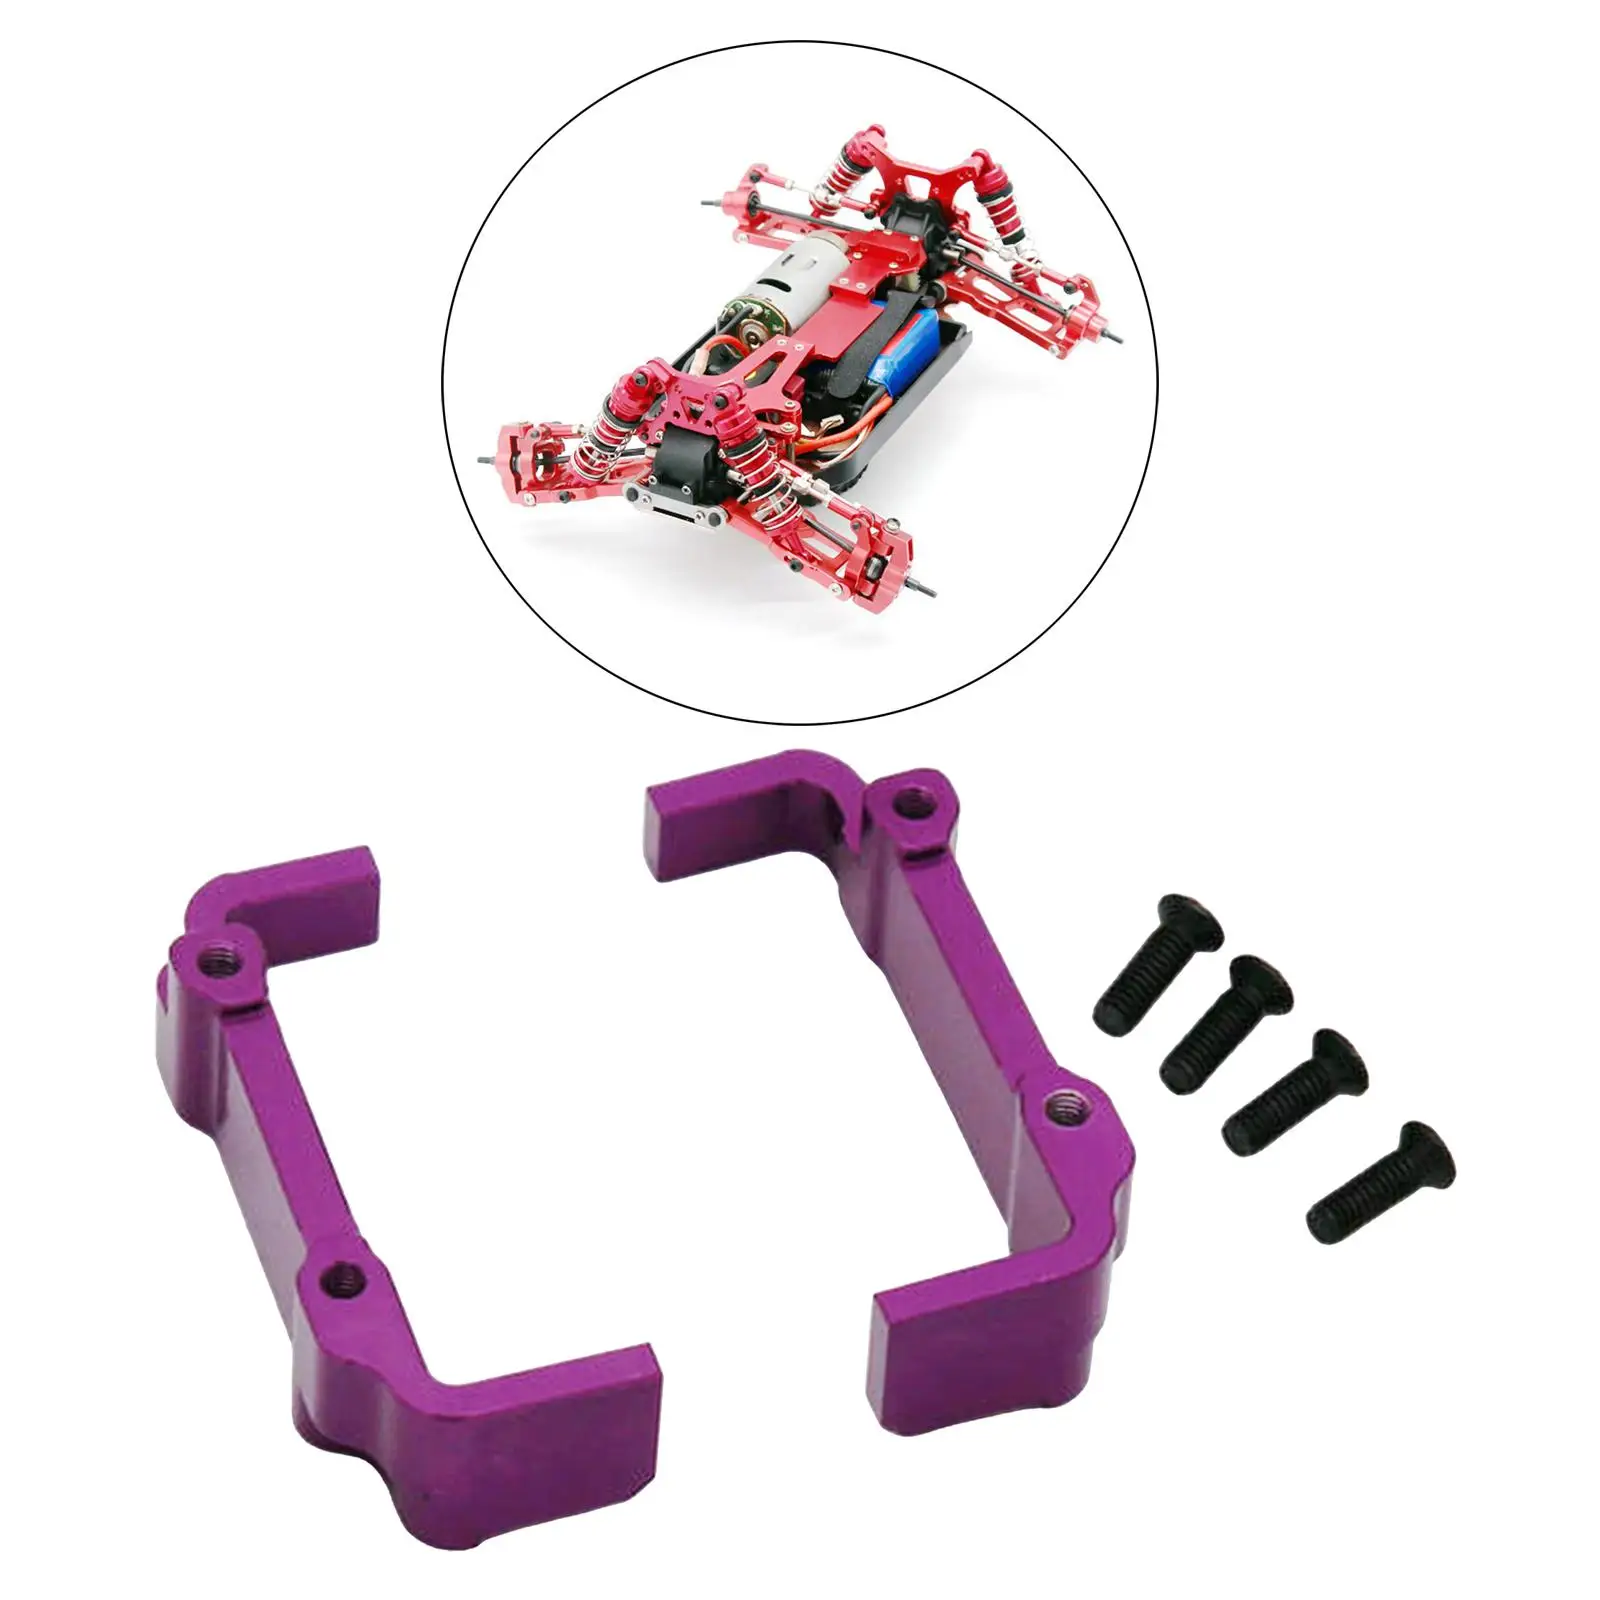 2x 1/12 RC Car Battery Holder Spare accessories Modified Part for  124016 1/12 Scale RC Car Trunk Model Toys